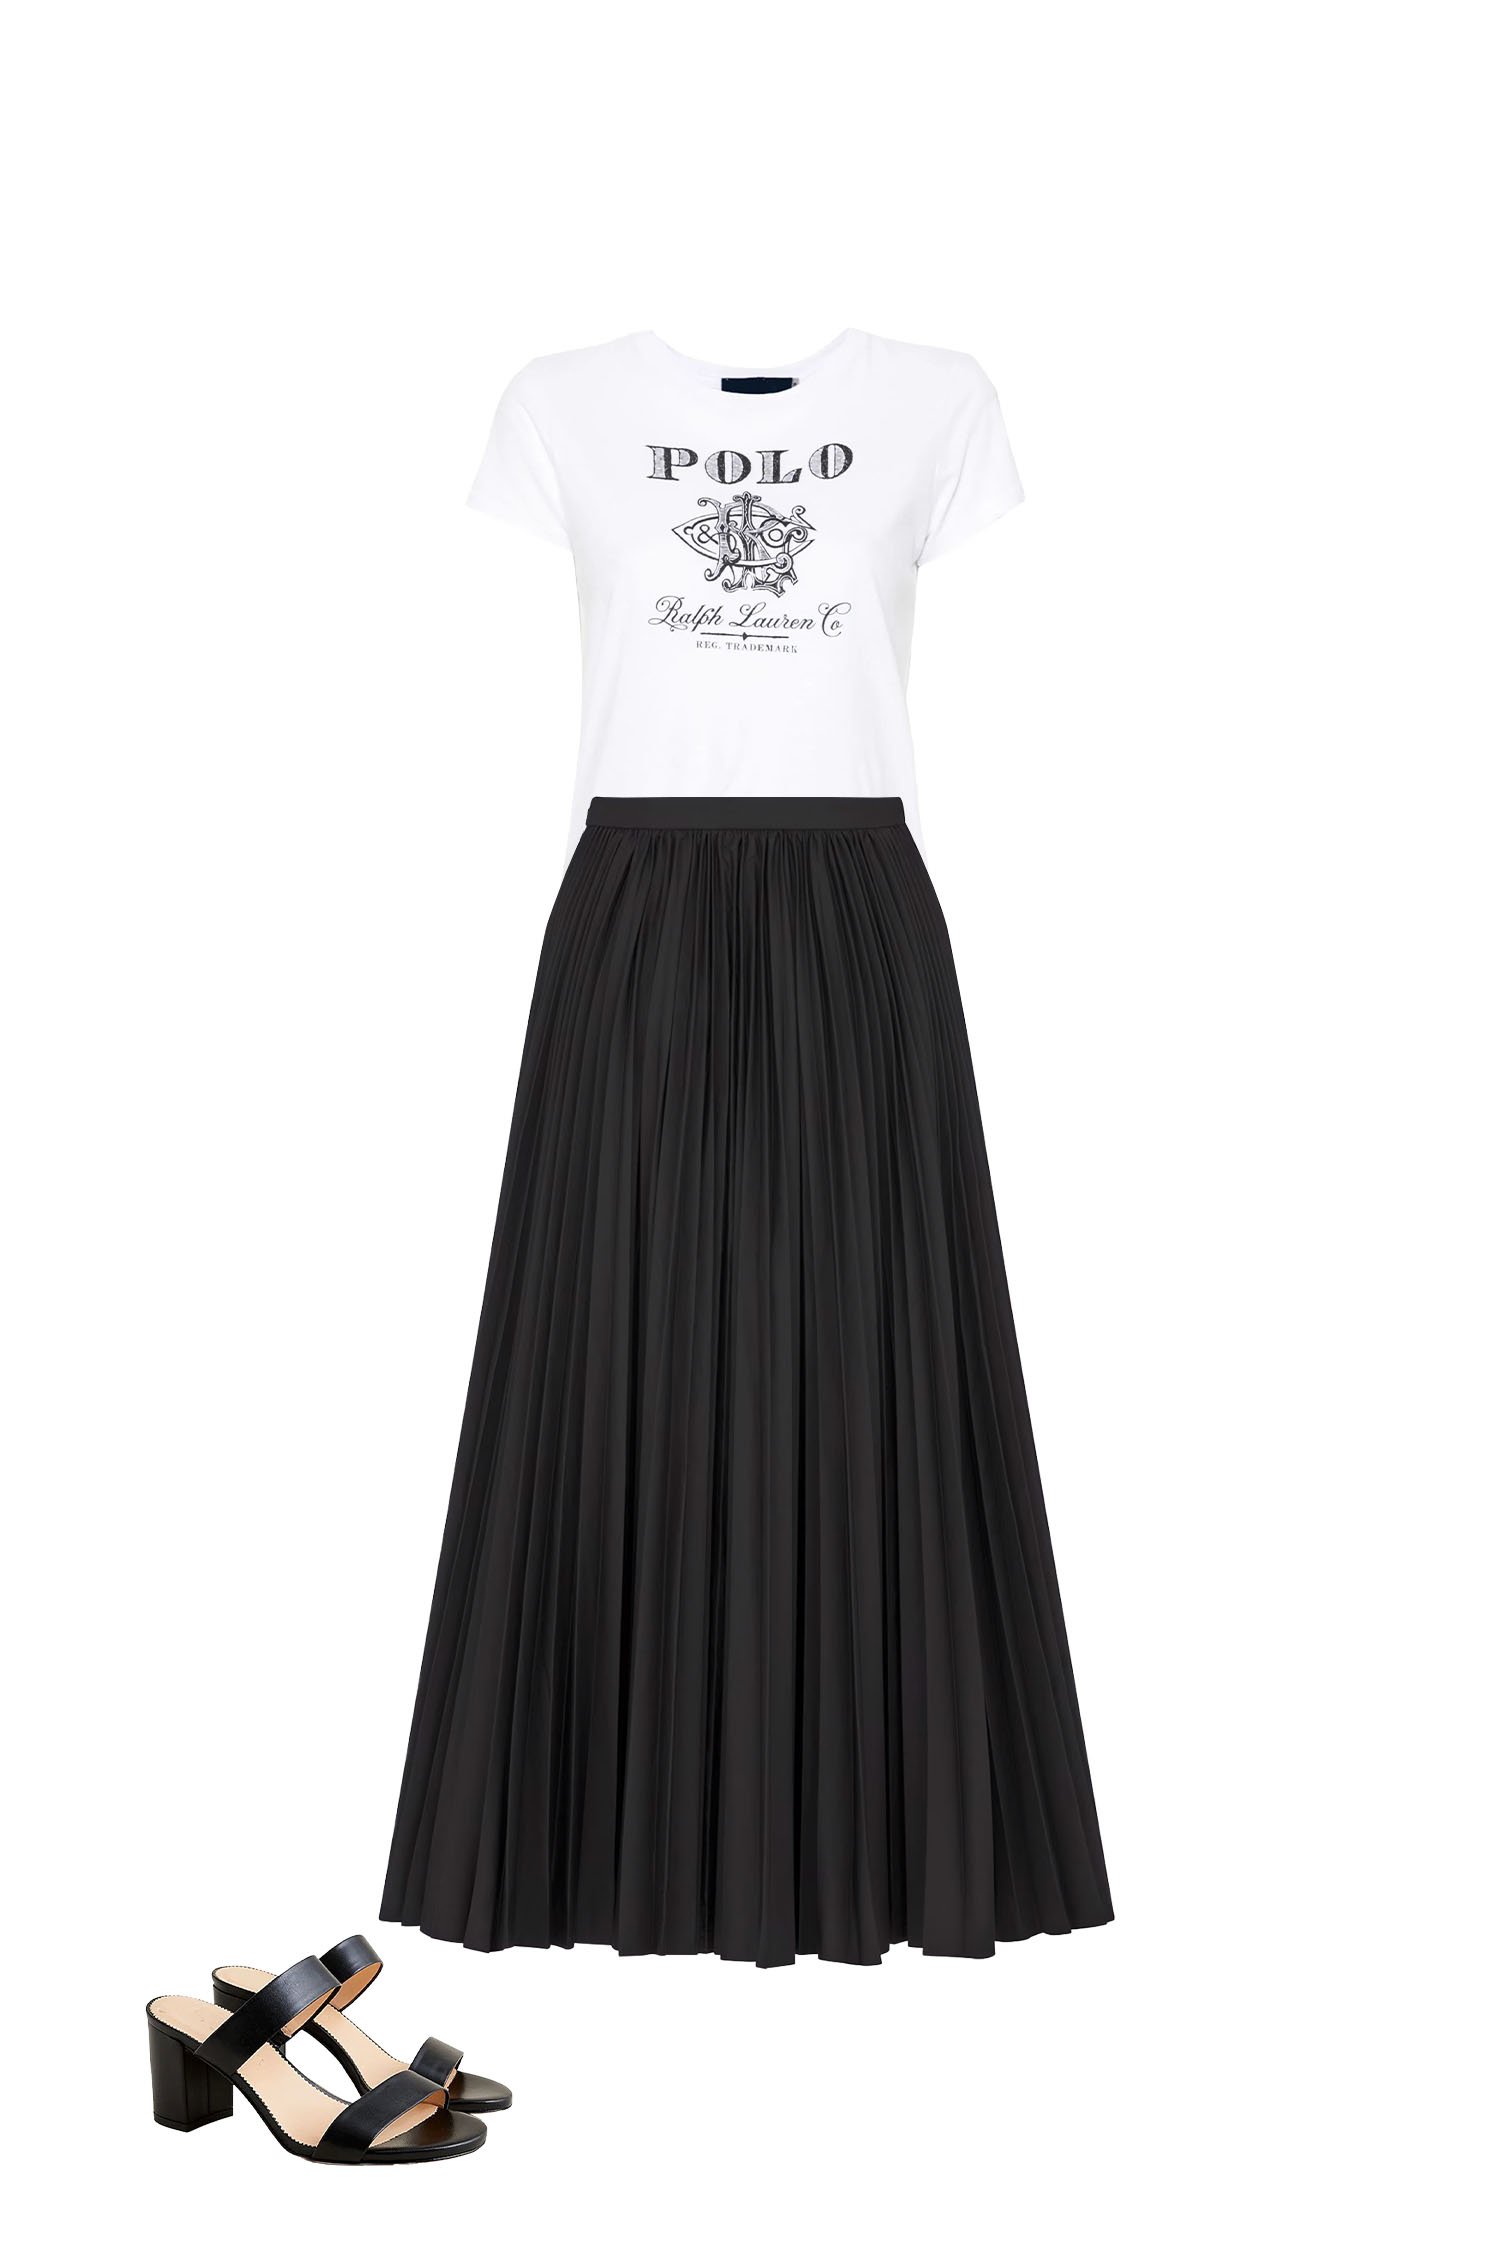 Black Pleated Skirt Outfit with White Graphic Print T-Shirt, and Black Block Heeled Sandals